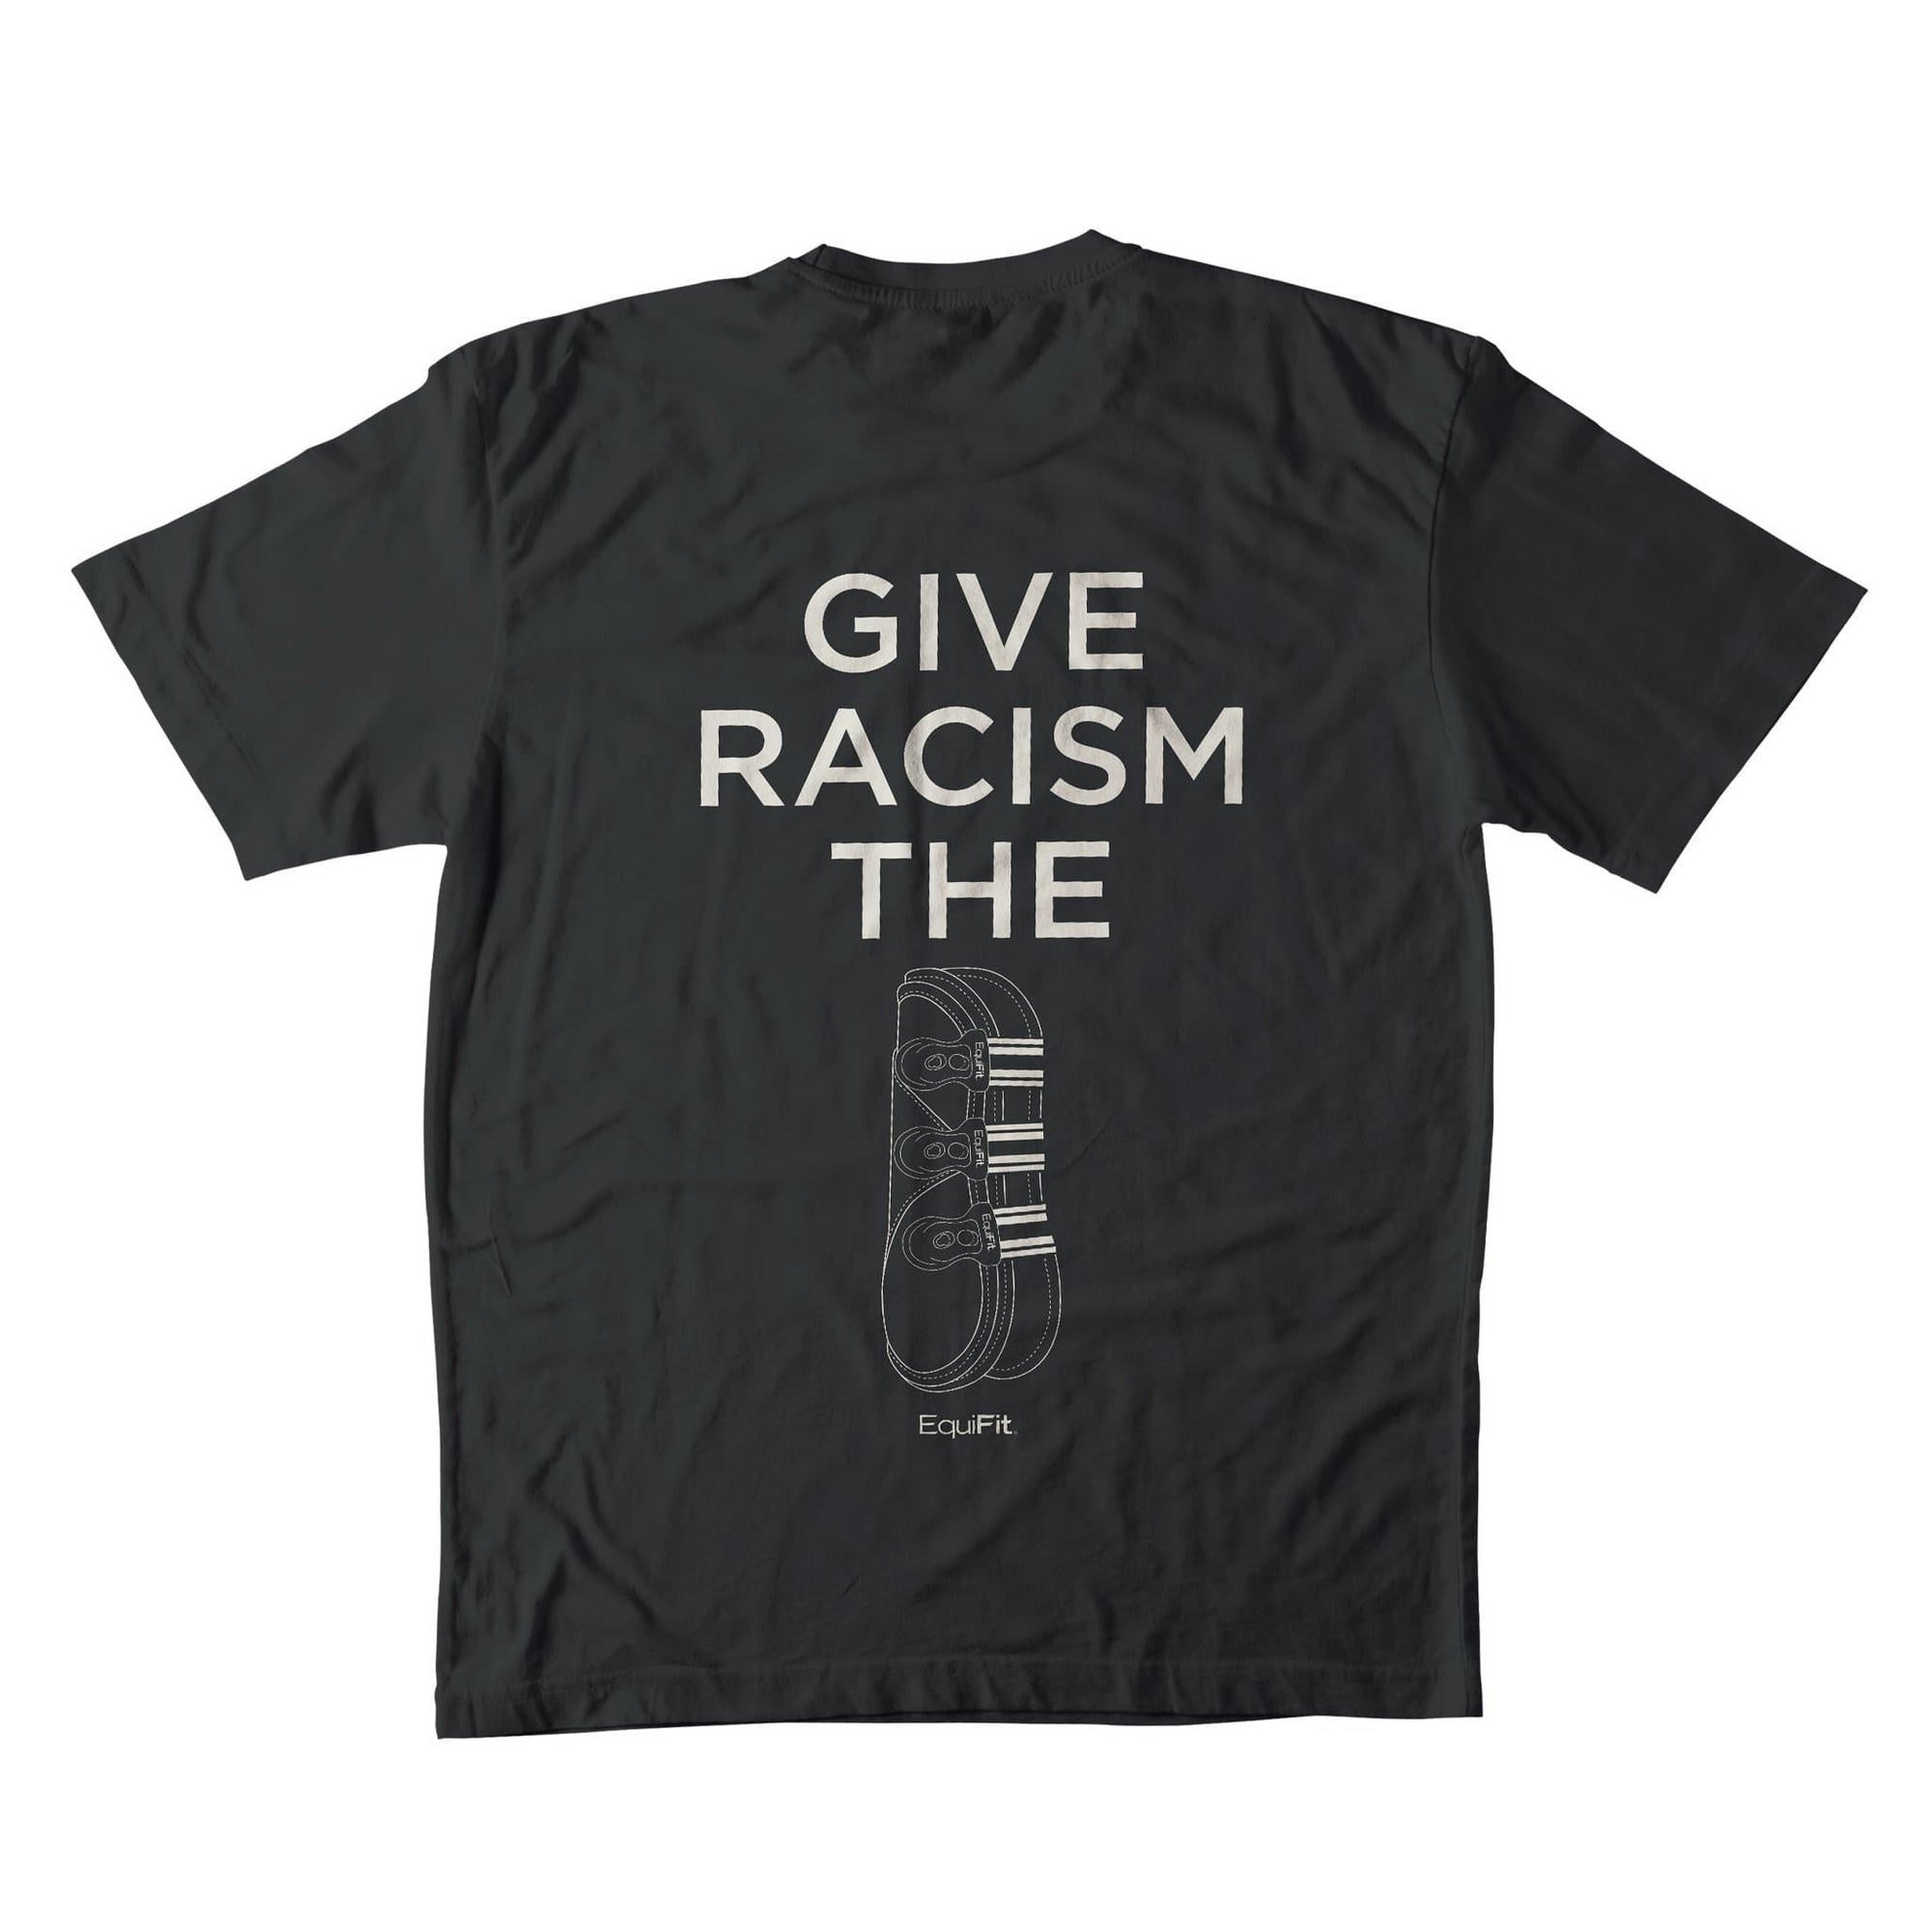 Give Racism The Boot T-Shirt proceeds will go to support the Compton Cowboys whose mission we are passionate about